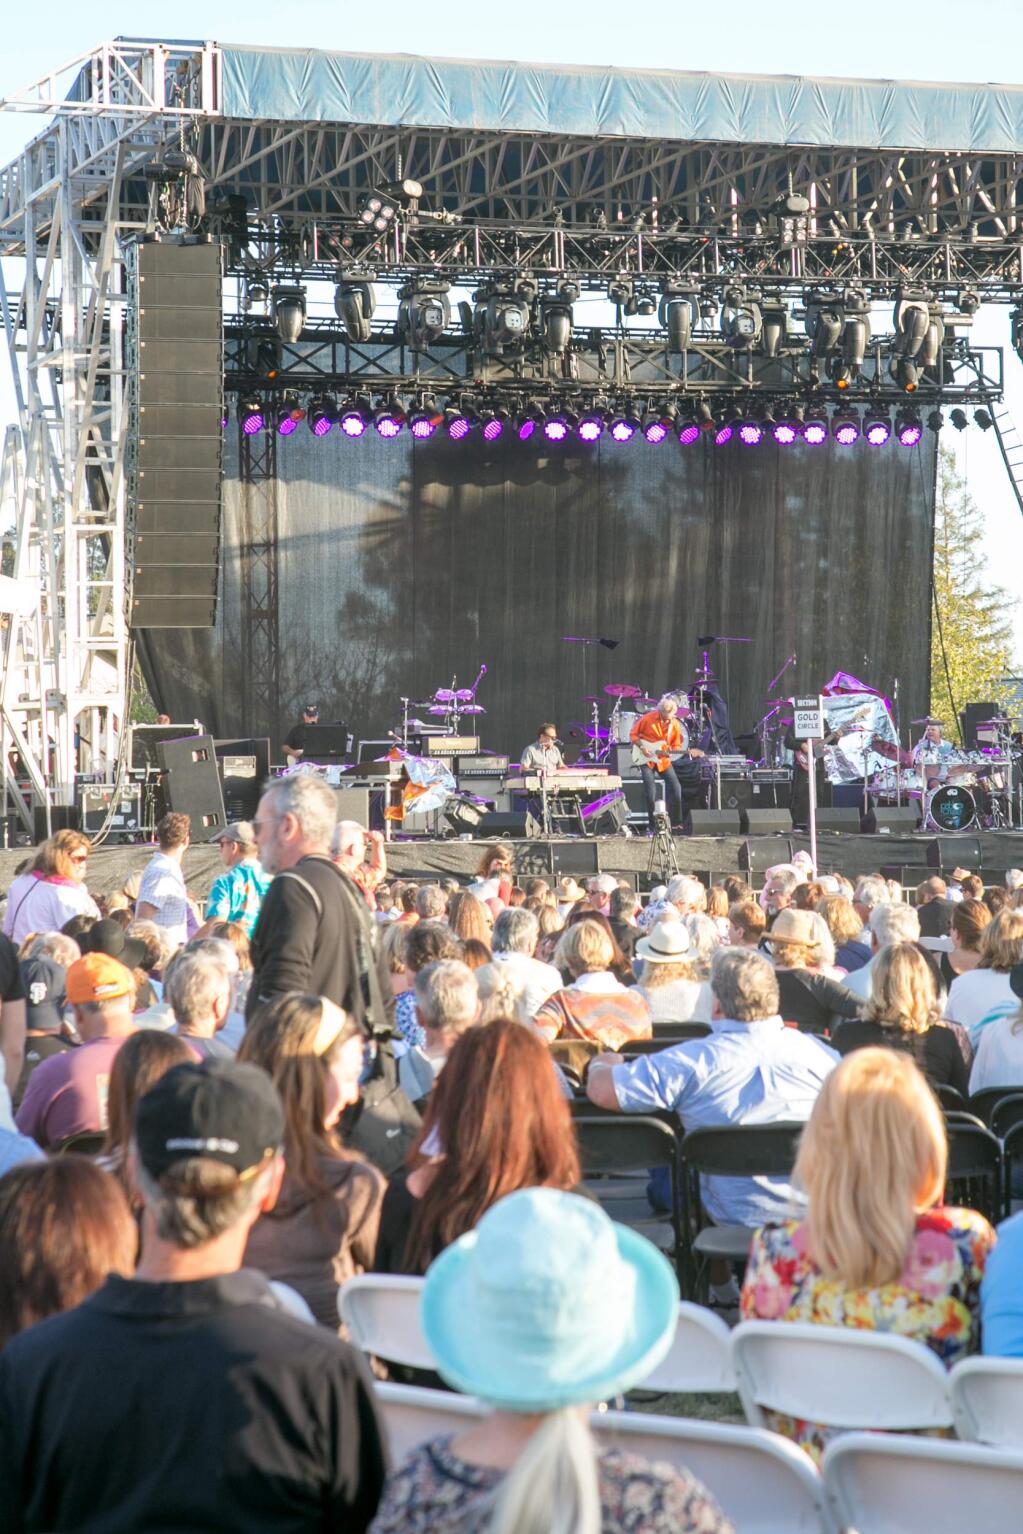 Saturday evening Pablo Cruise was the opening band on the big stage at the 2015 Sonoma Music Festival. (Photo by Julie Vader/Special to the Sonoma Index-Tribune)